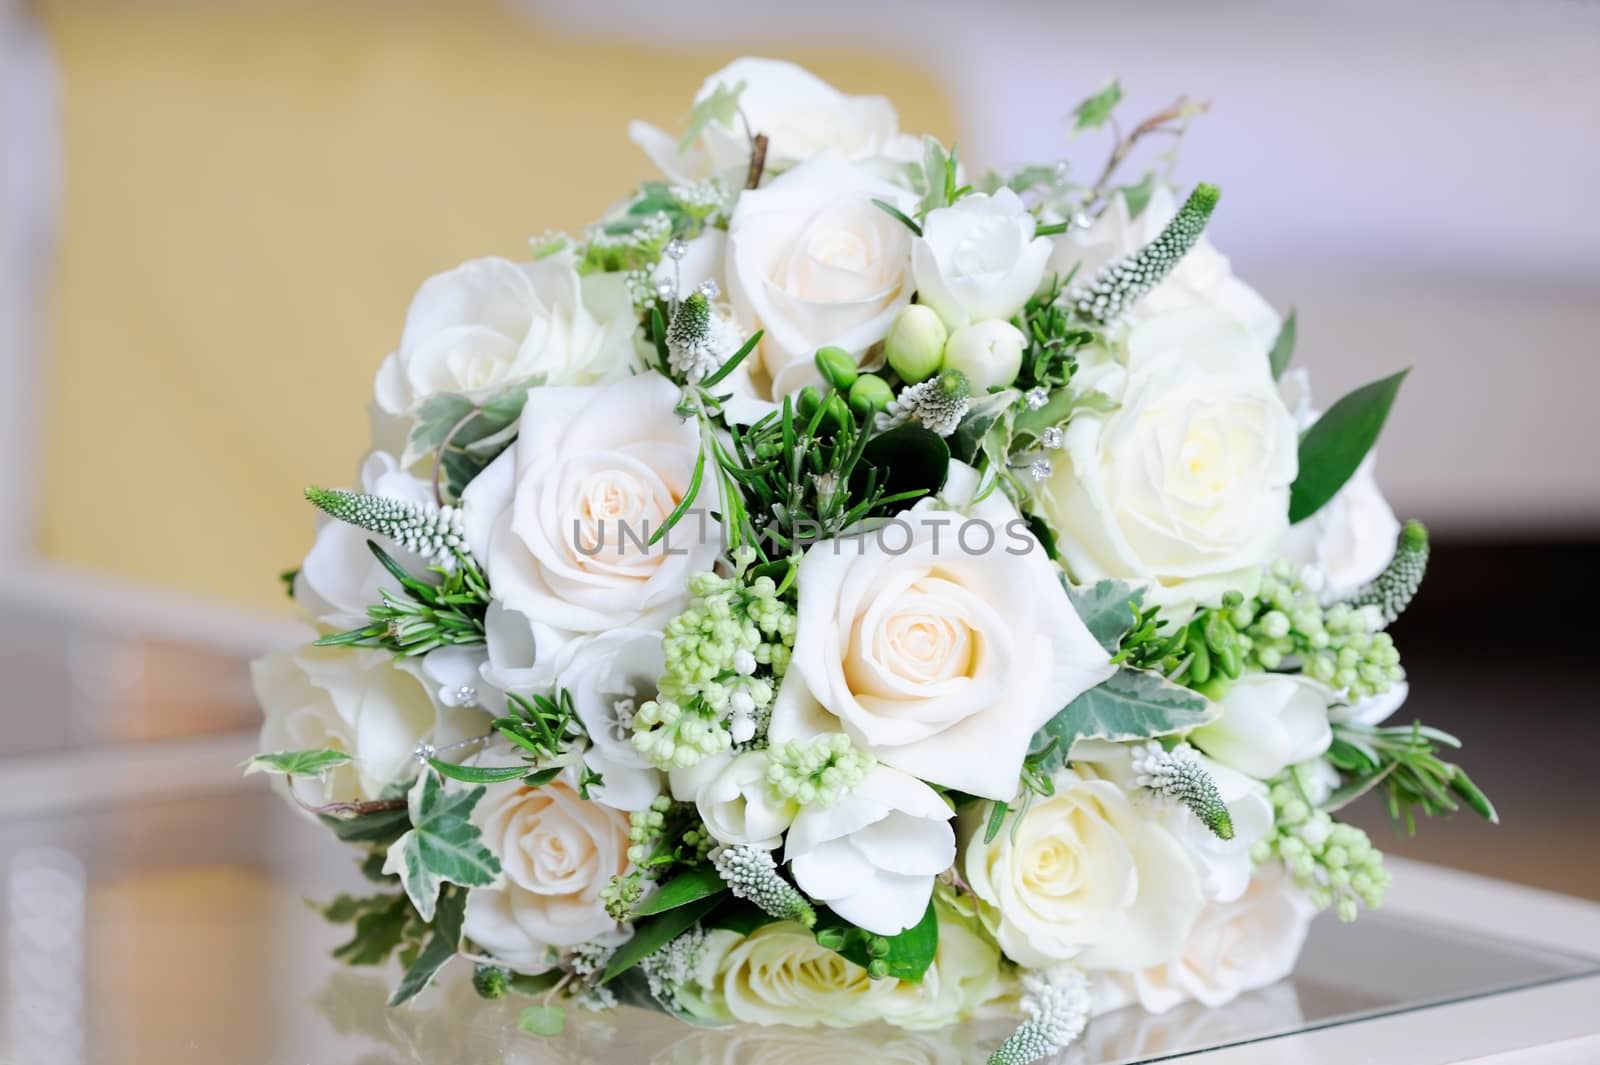 Brides white roses by kmwphotography